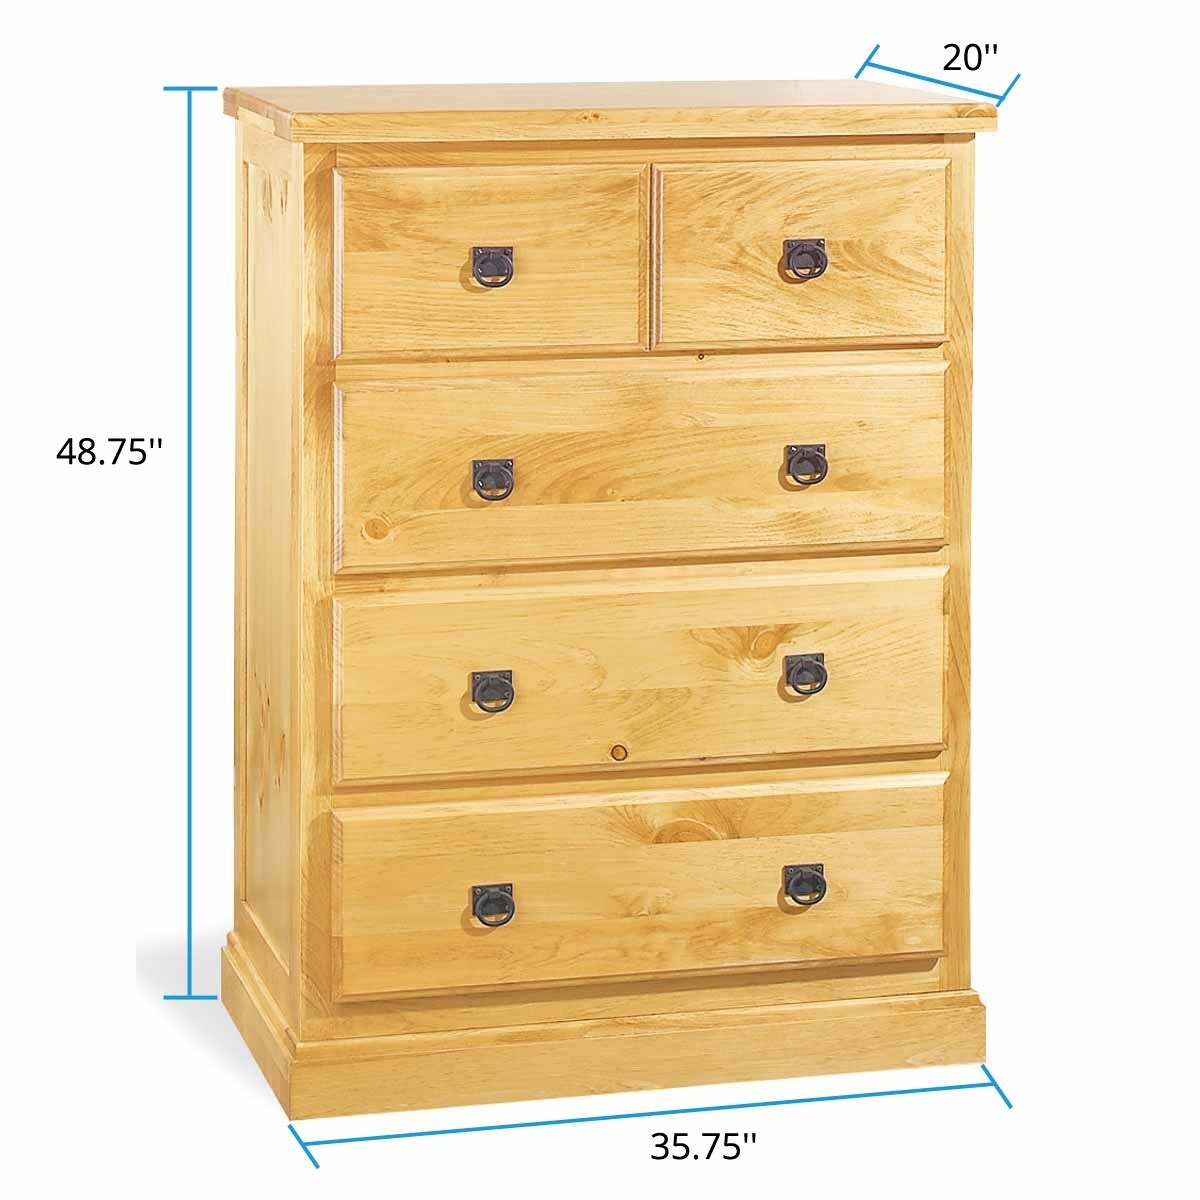 Shop Pine Stafford Four Drawer Dressers Bedroom Wooden Chests